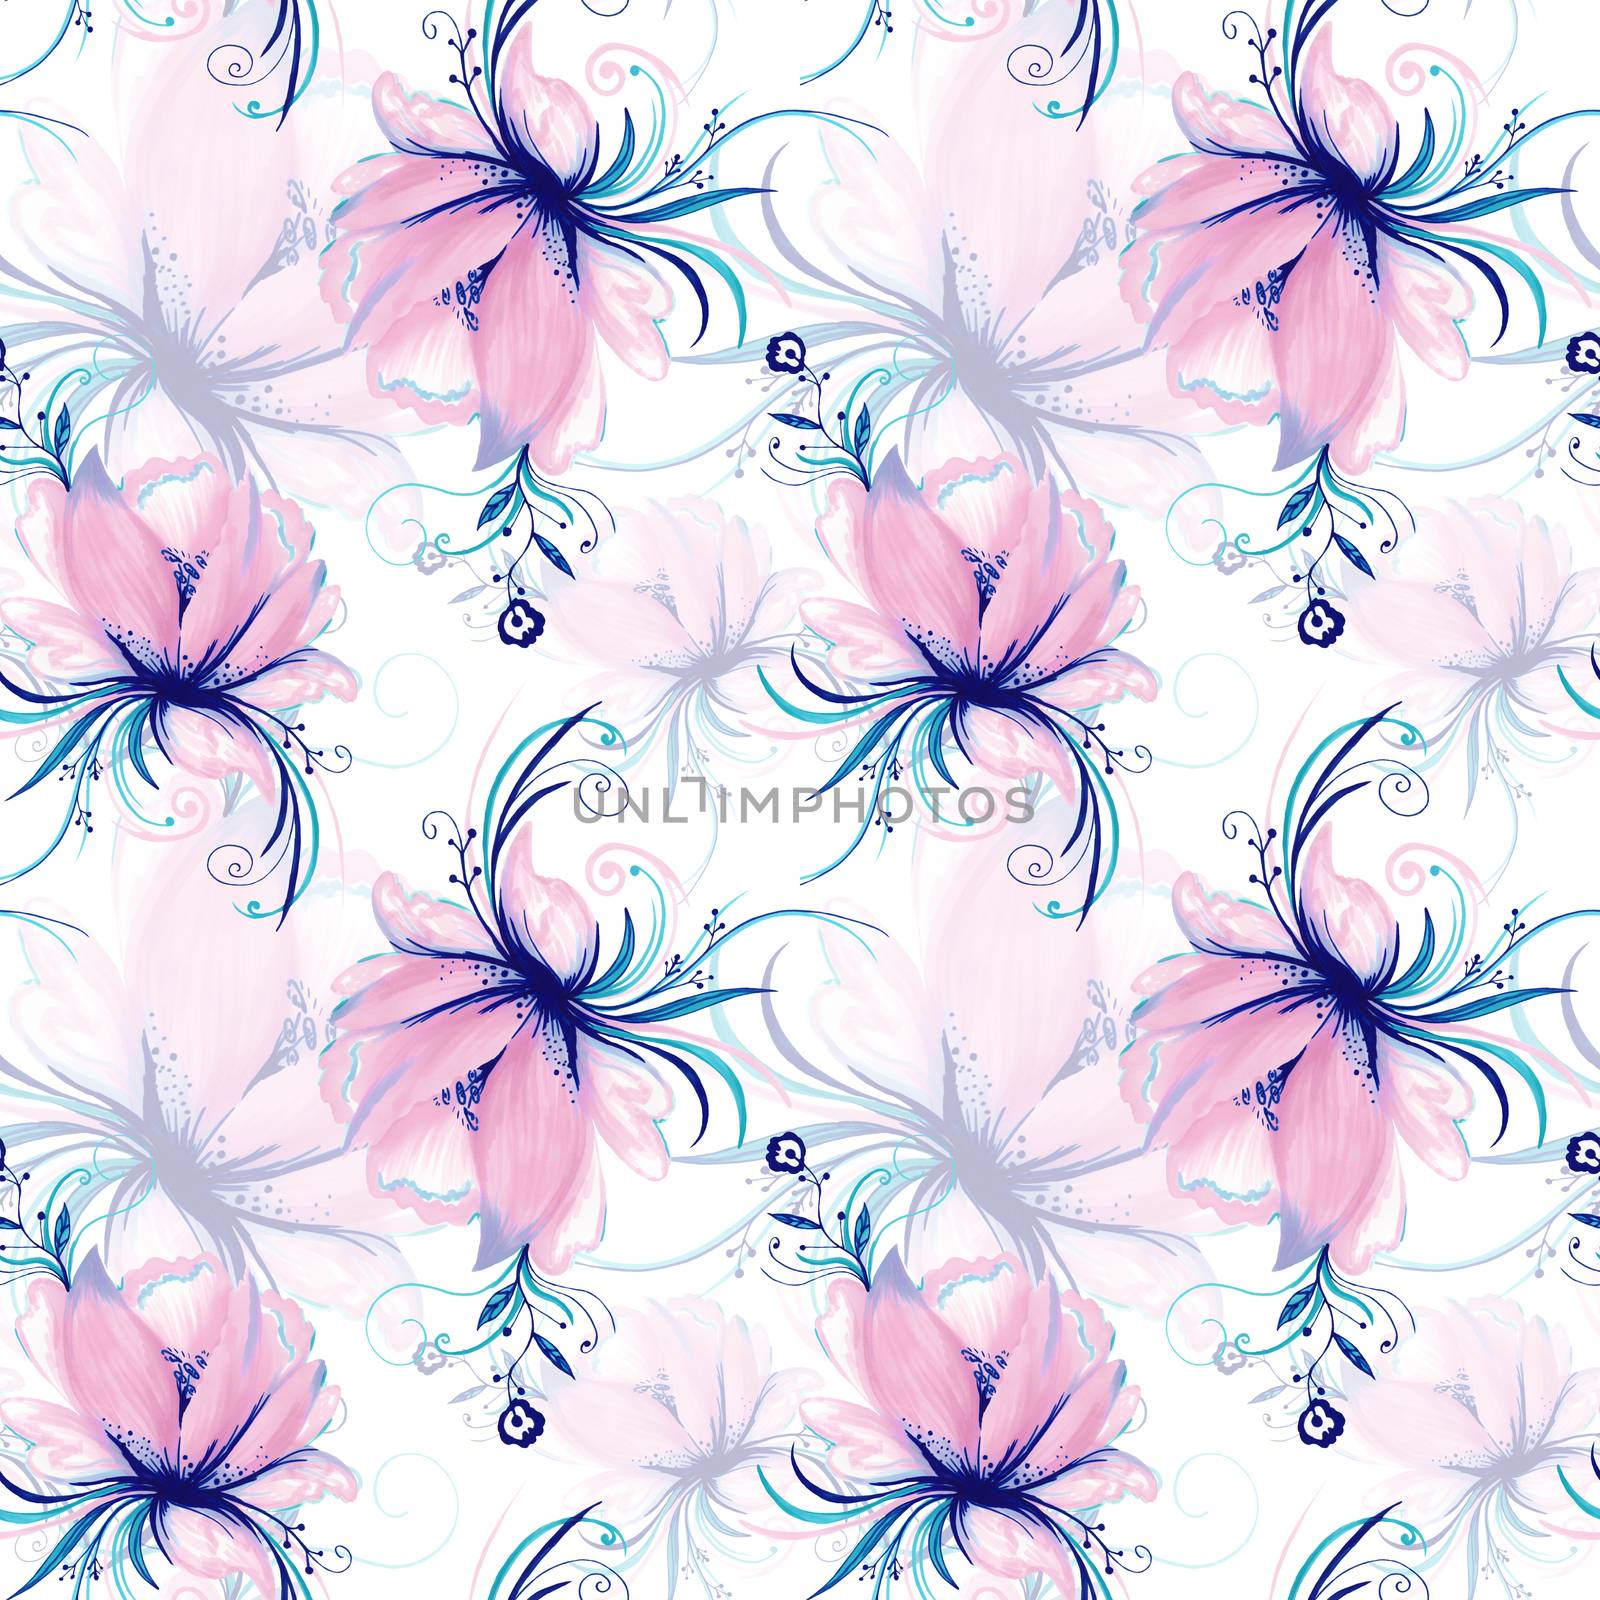 Seamless texture with ornamental lotus flowers isolated on white background